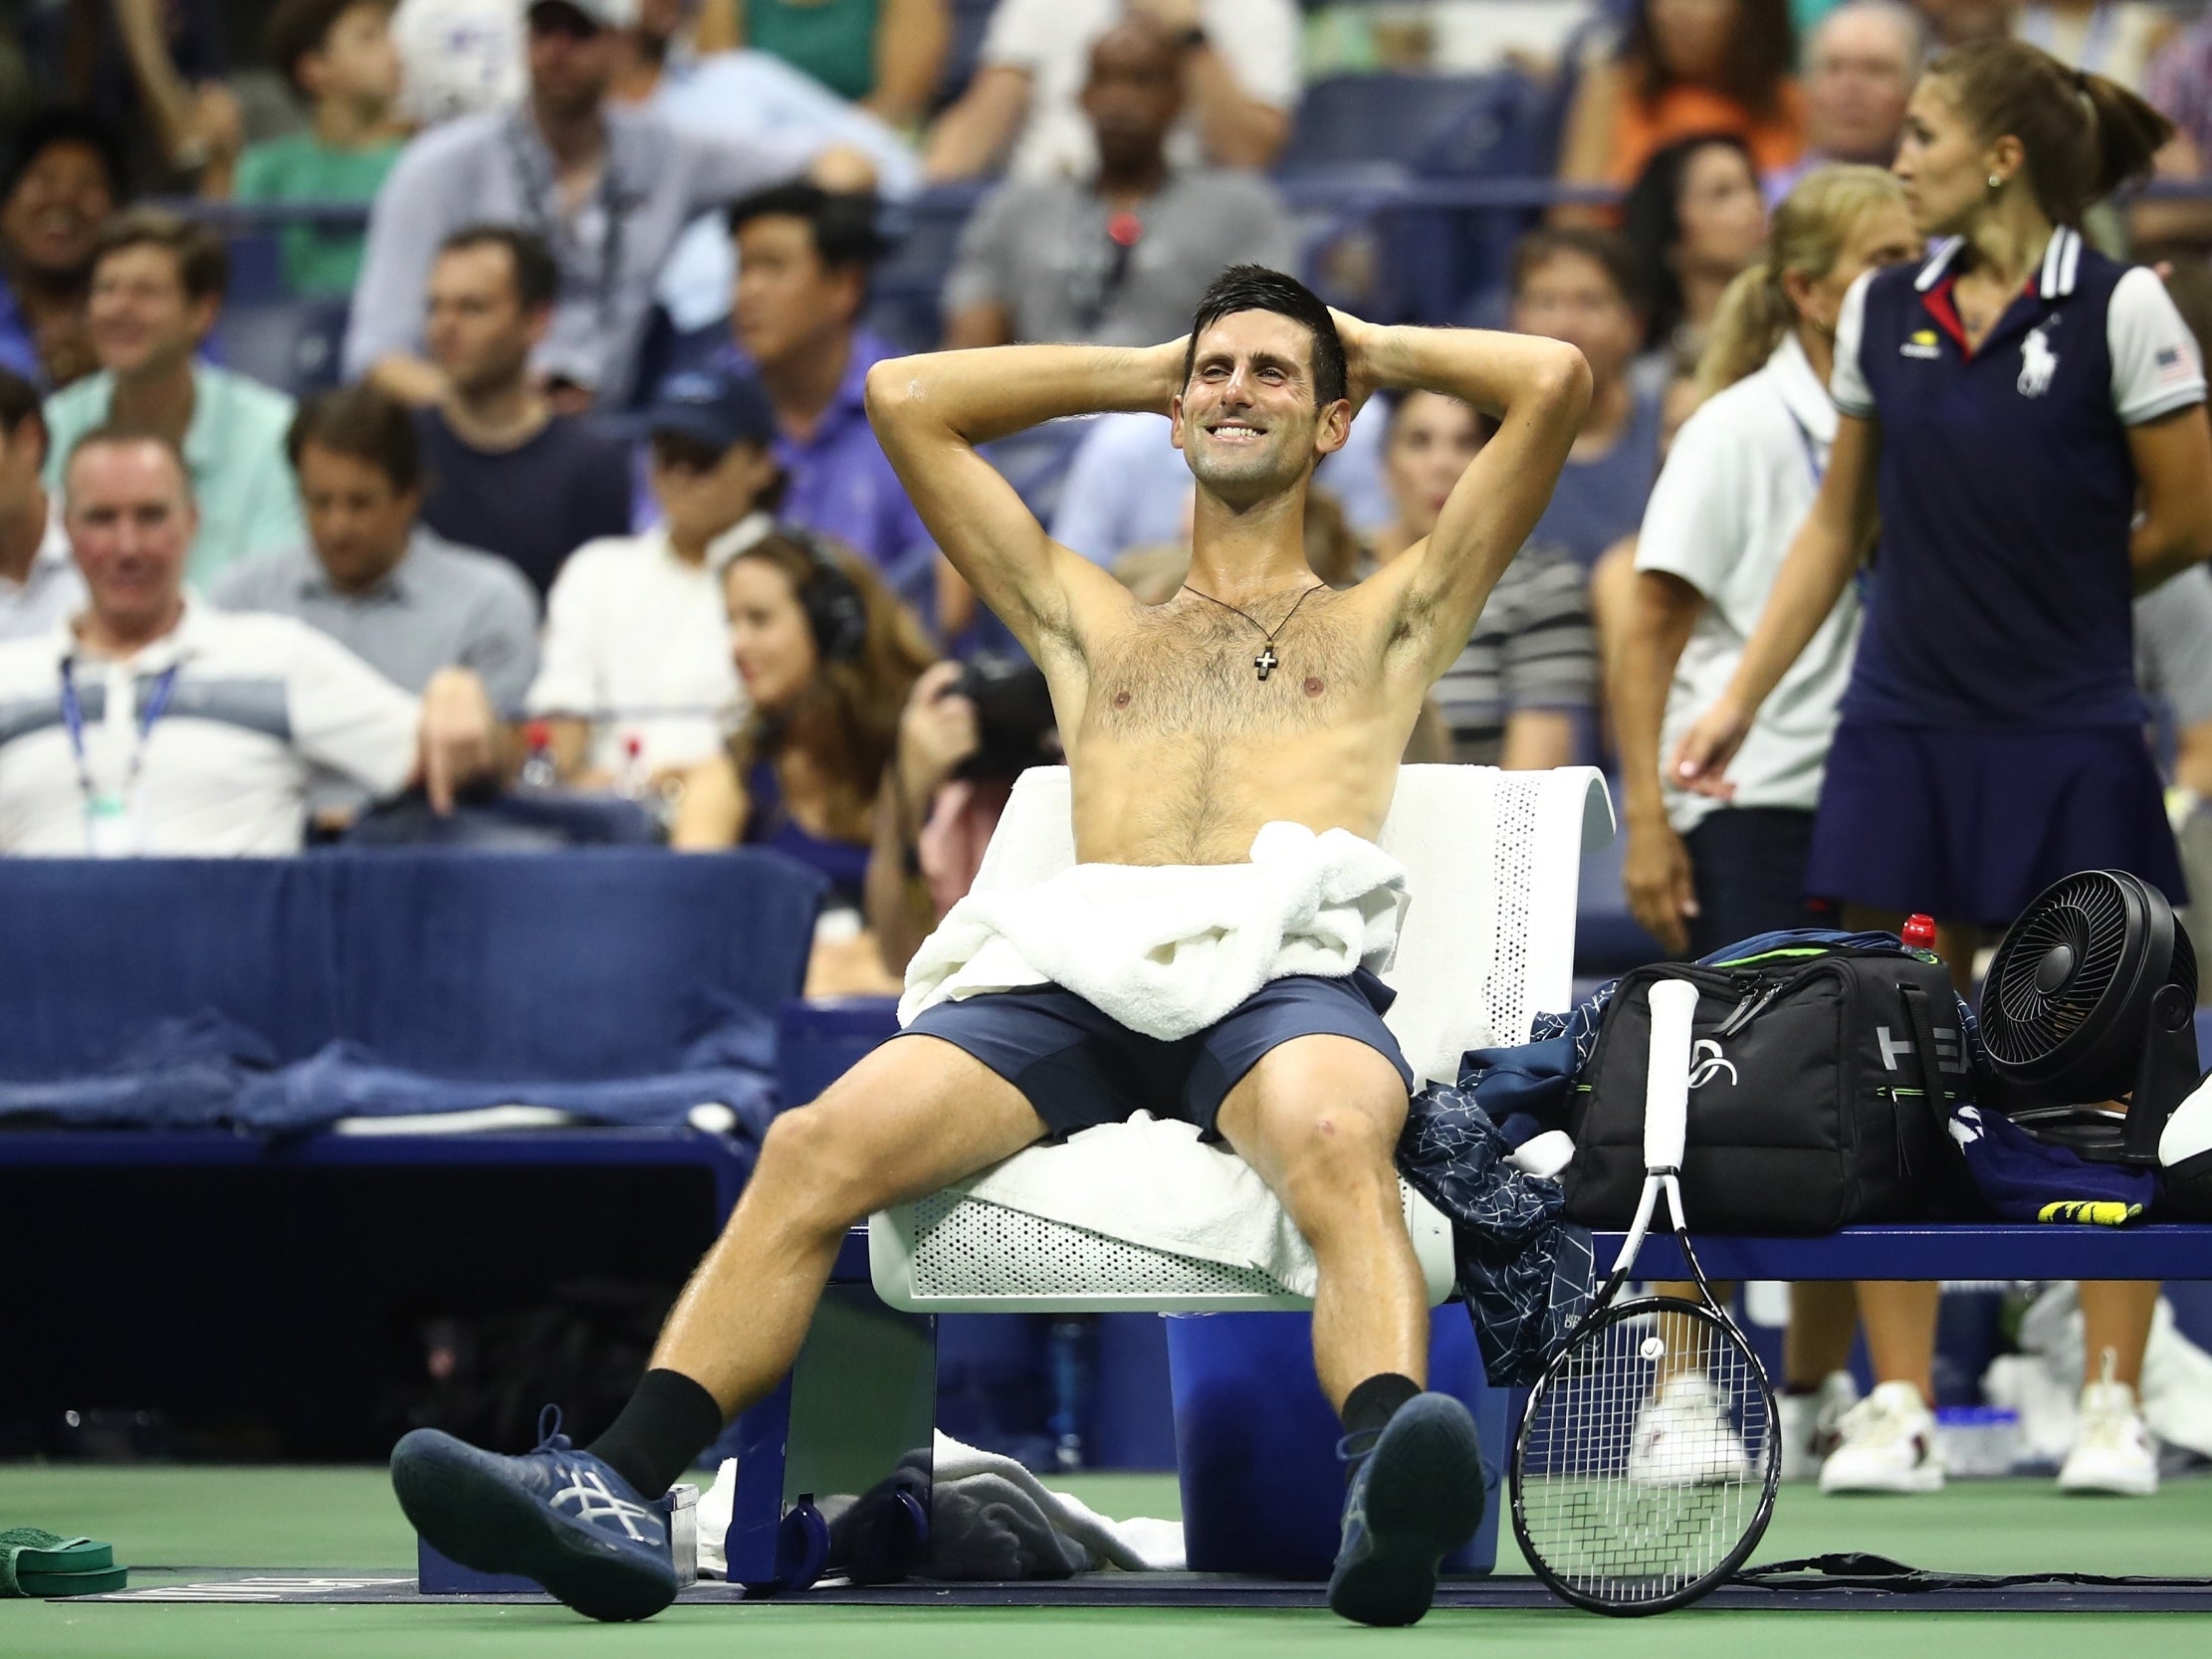 The heat once again took its toll on players at the US Open